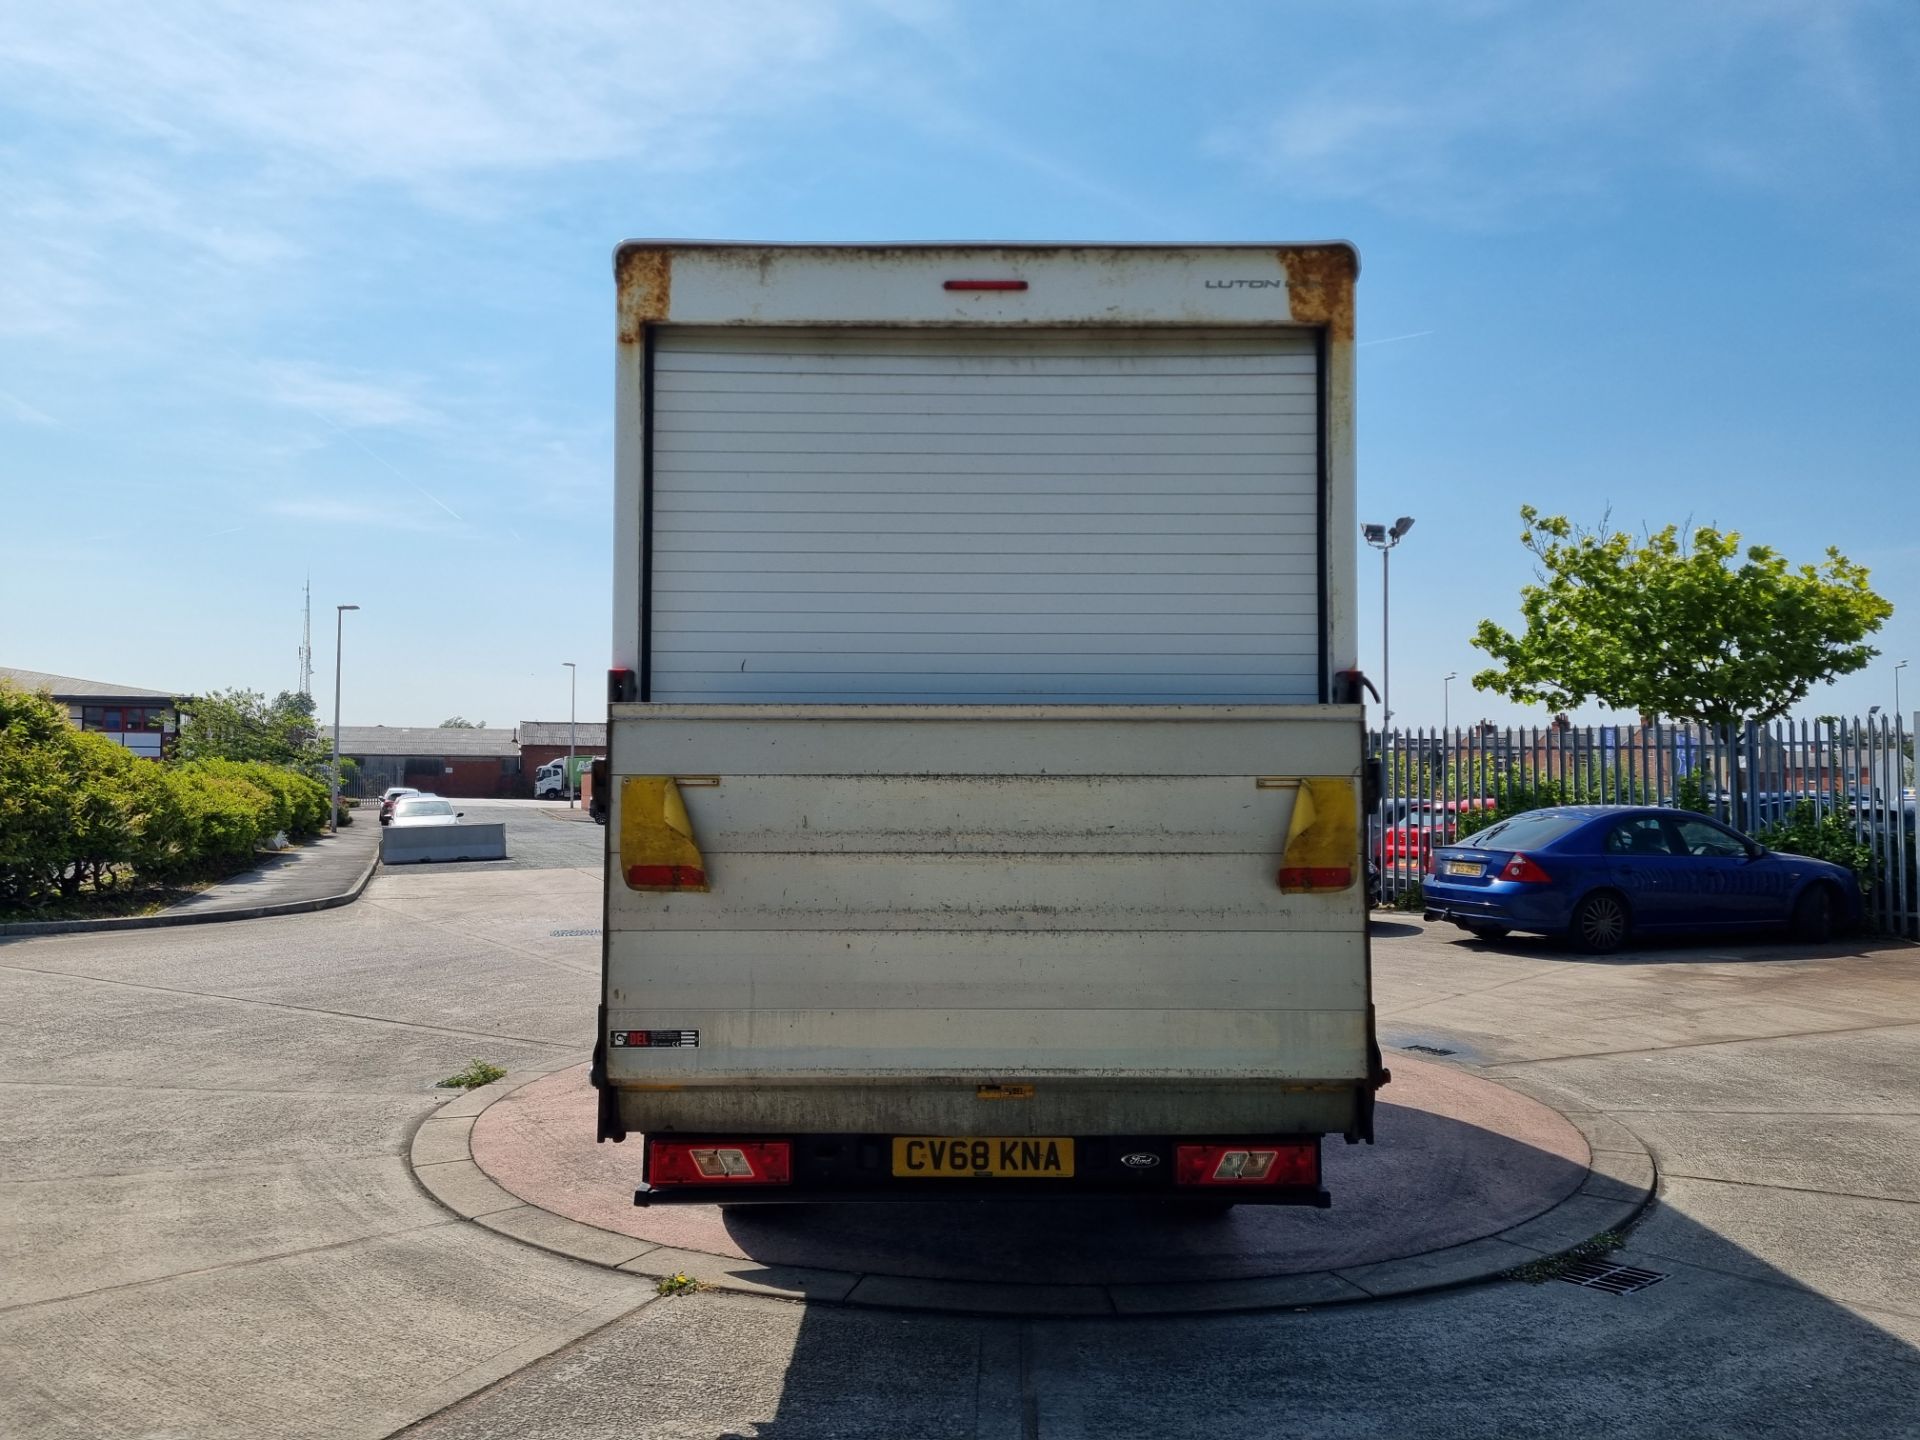 2018 Transit Luton with tail lift - Image 5 of 13